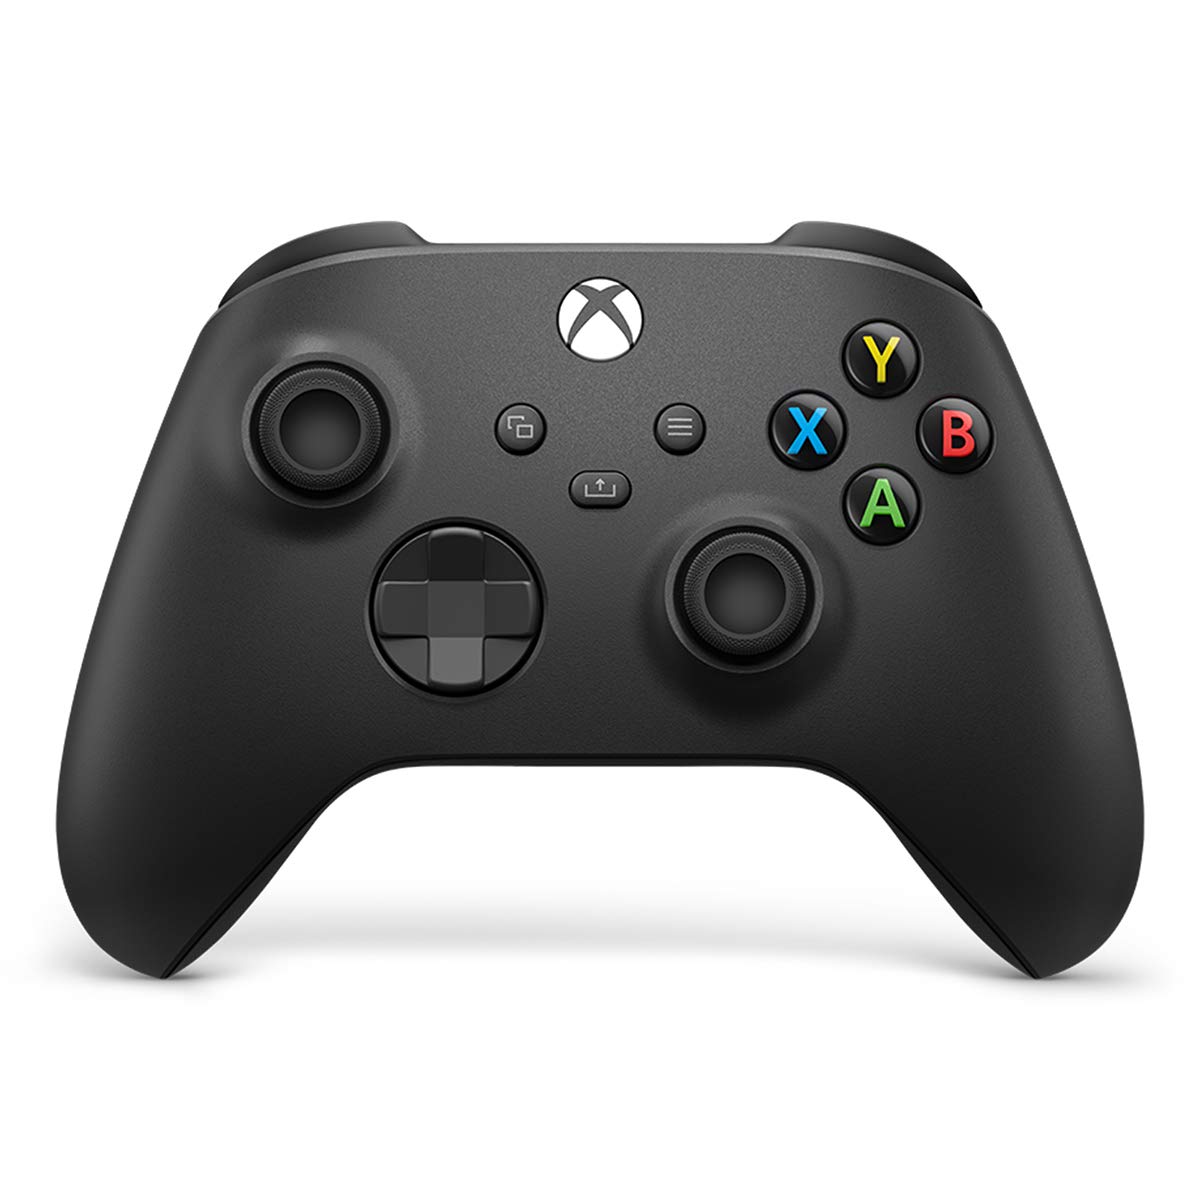 Microsoft Xbox Series X 1TB Console with Extra Wireless Controller - Black - image 2 of 4